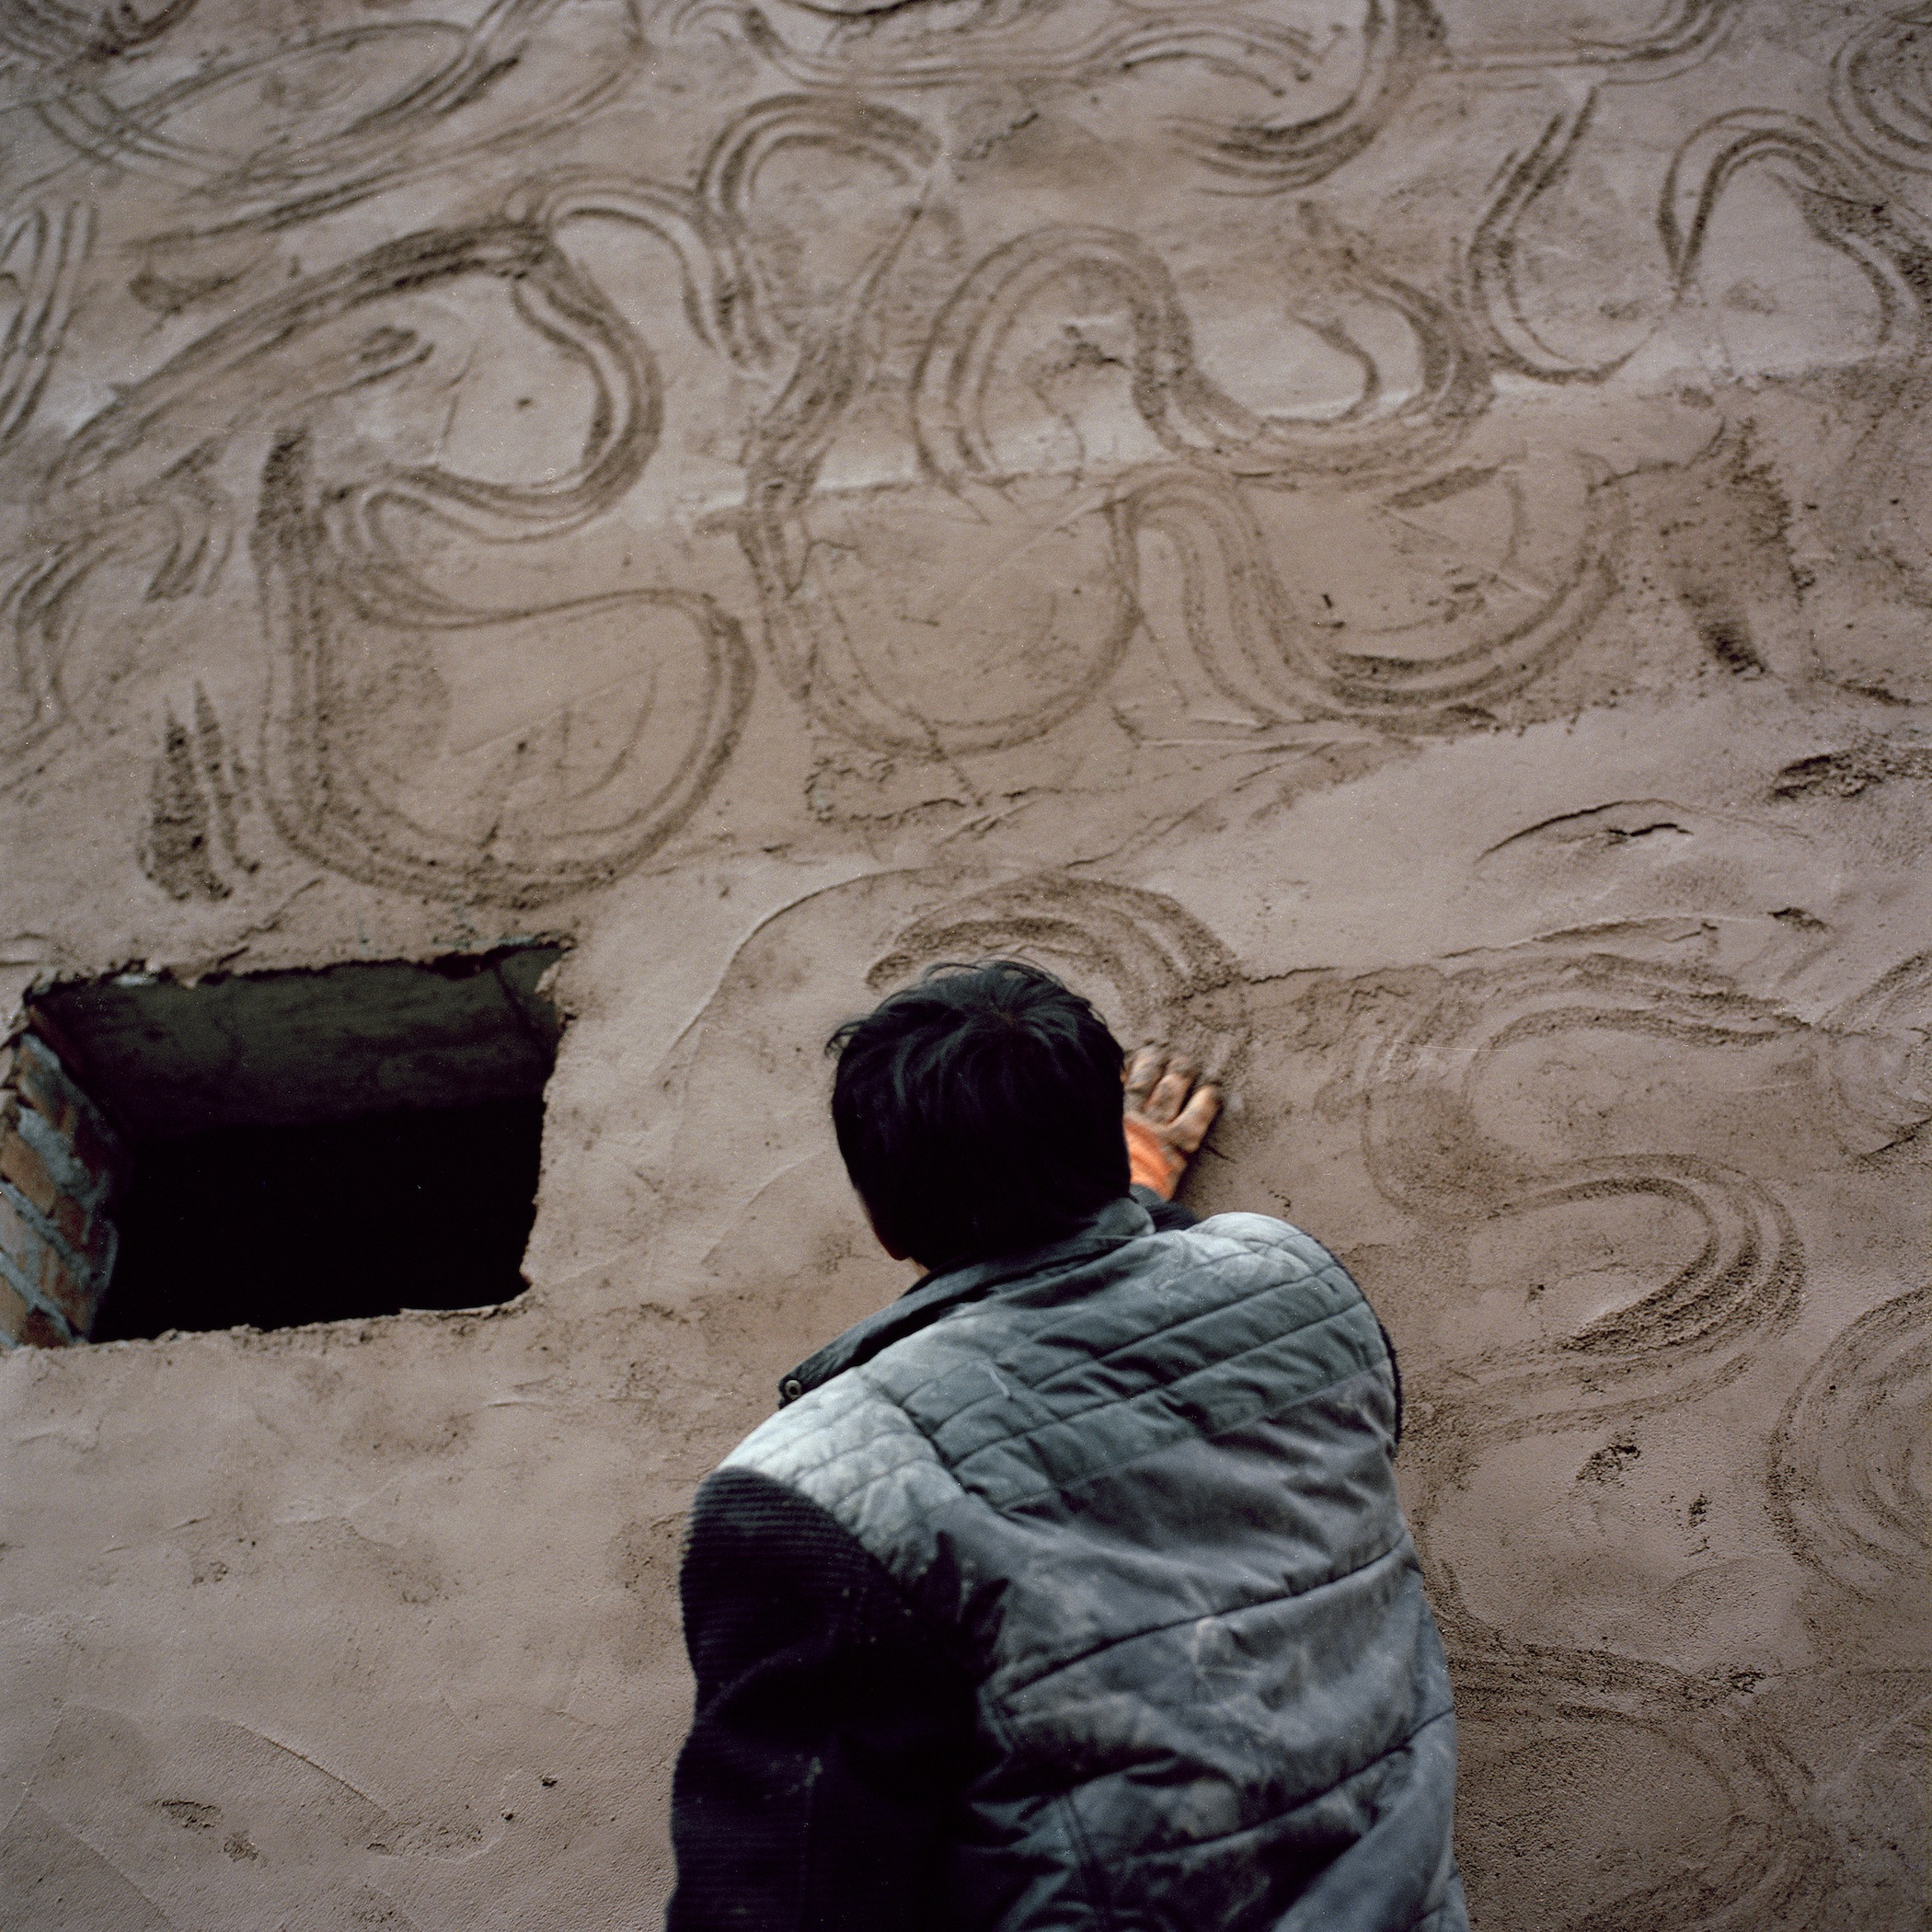 A Hired Han Worker Decorating the Exterior Walls of a Qiang Family's House, Radish Village, Sichuan, China, March 2016